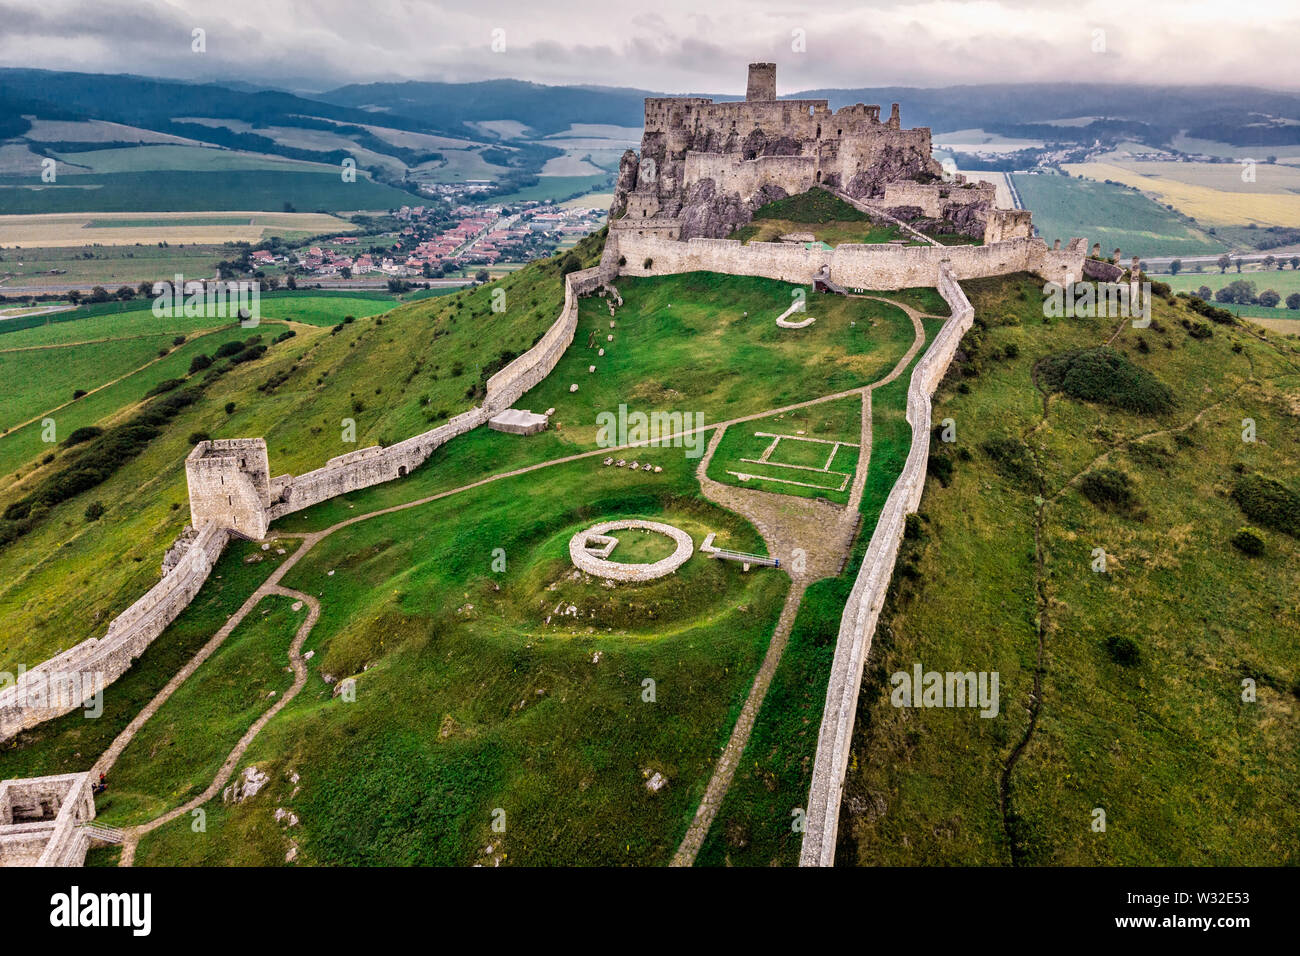 The Spis Castle - Spissky hrad National Cultural Monument (UNESCO) - Spis Castle - One of the largest castle in Central Europe (Slovakia). Stock Photo